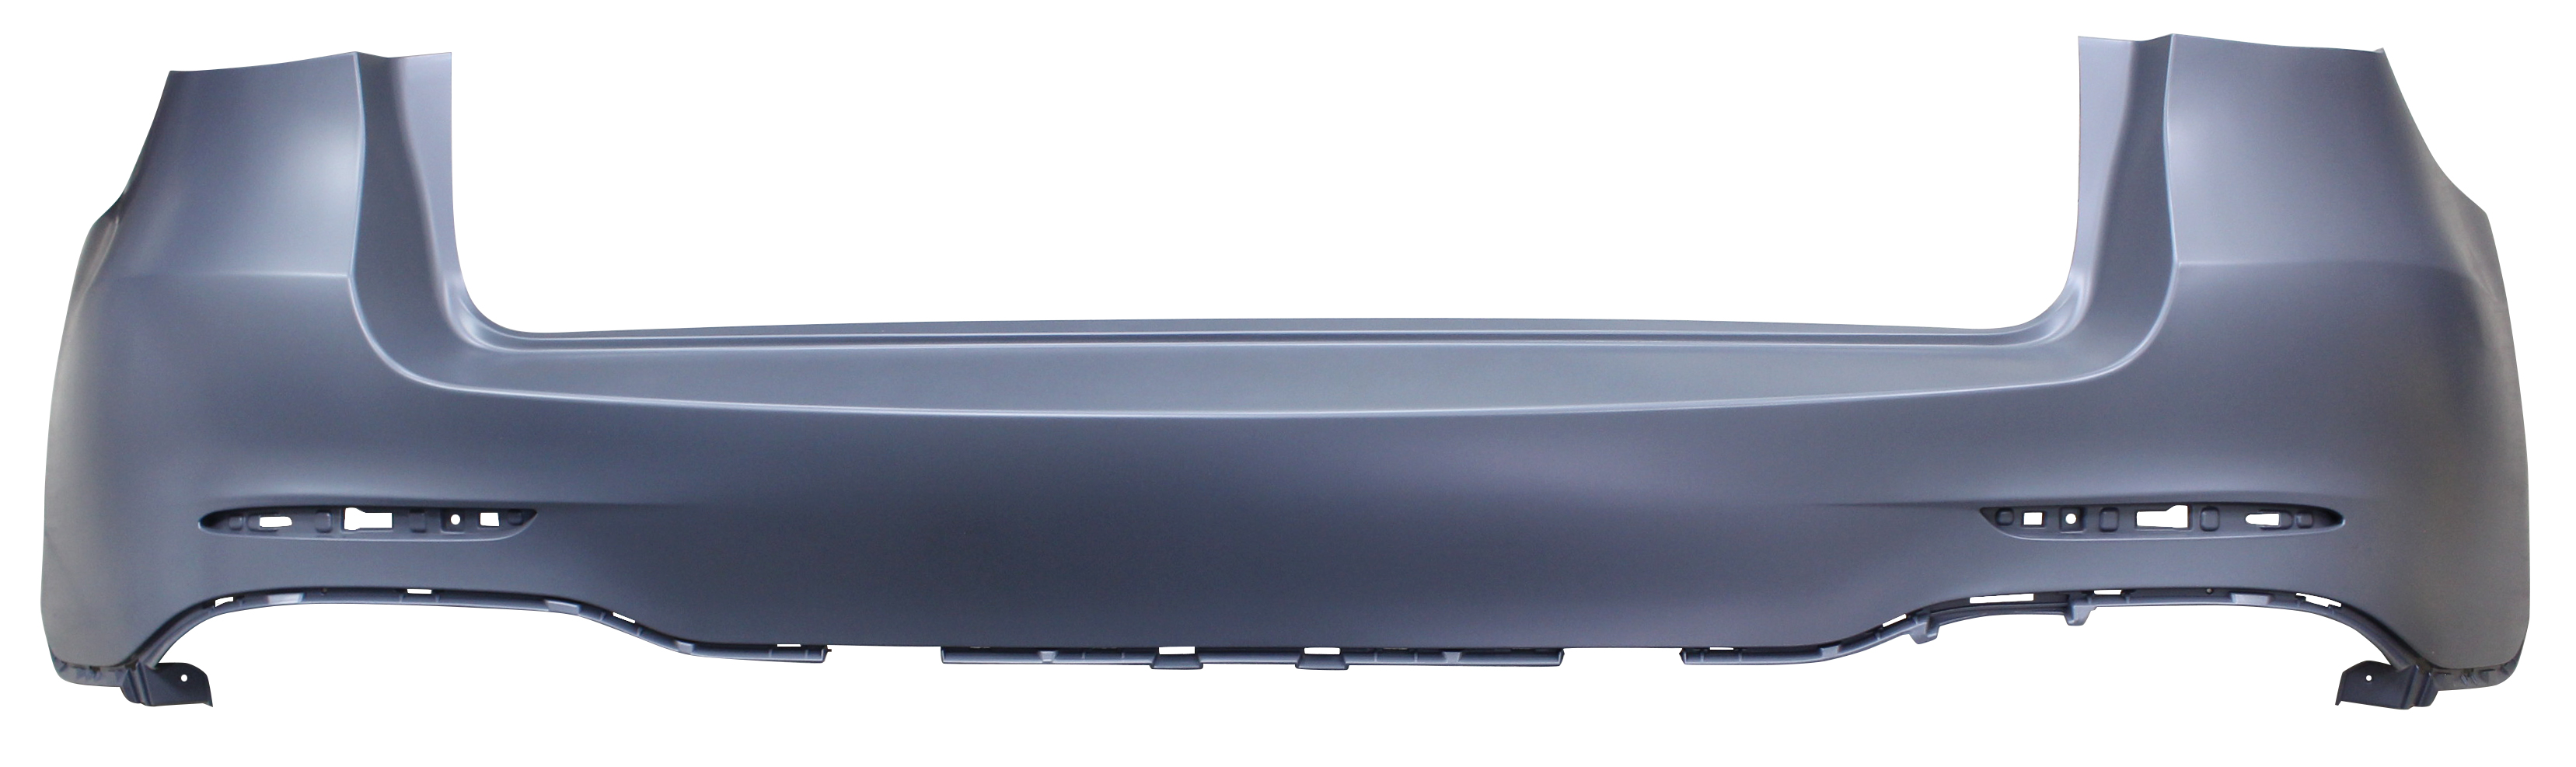 Aftermarket BUMPER COVERS for MERCEDES-BENZ - GLC63 AMG S, GLC63 AMG S,18-19,Rear bumper cover upper